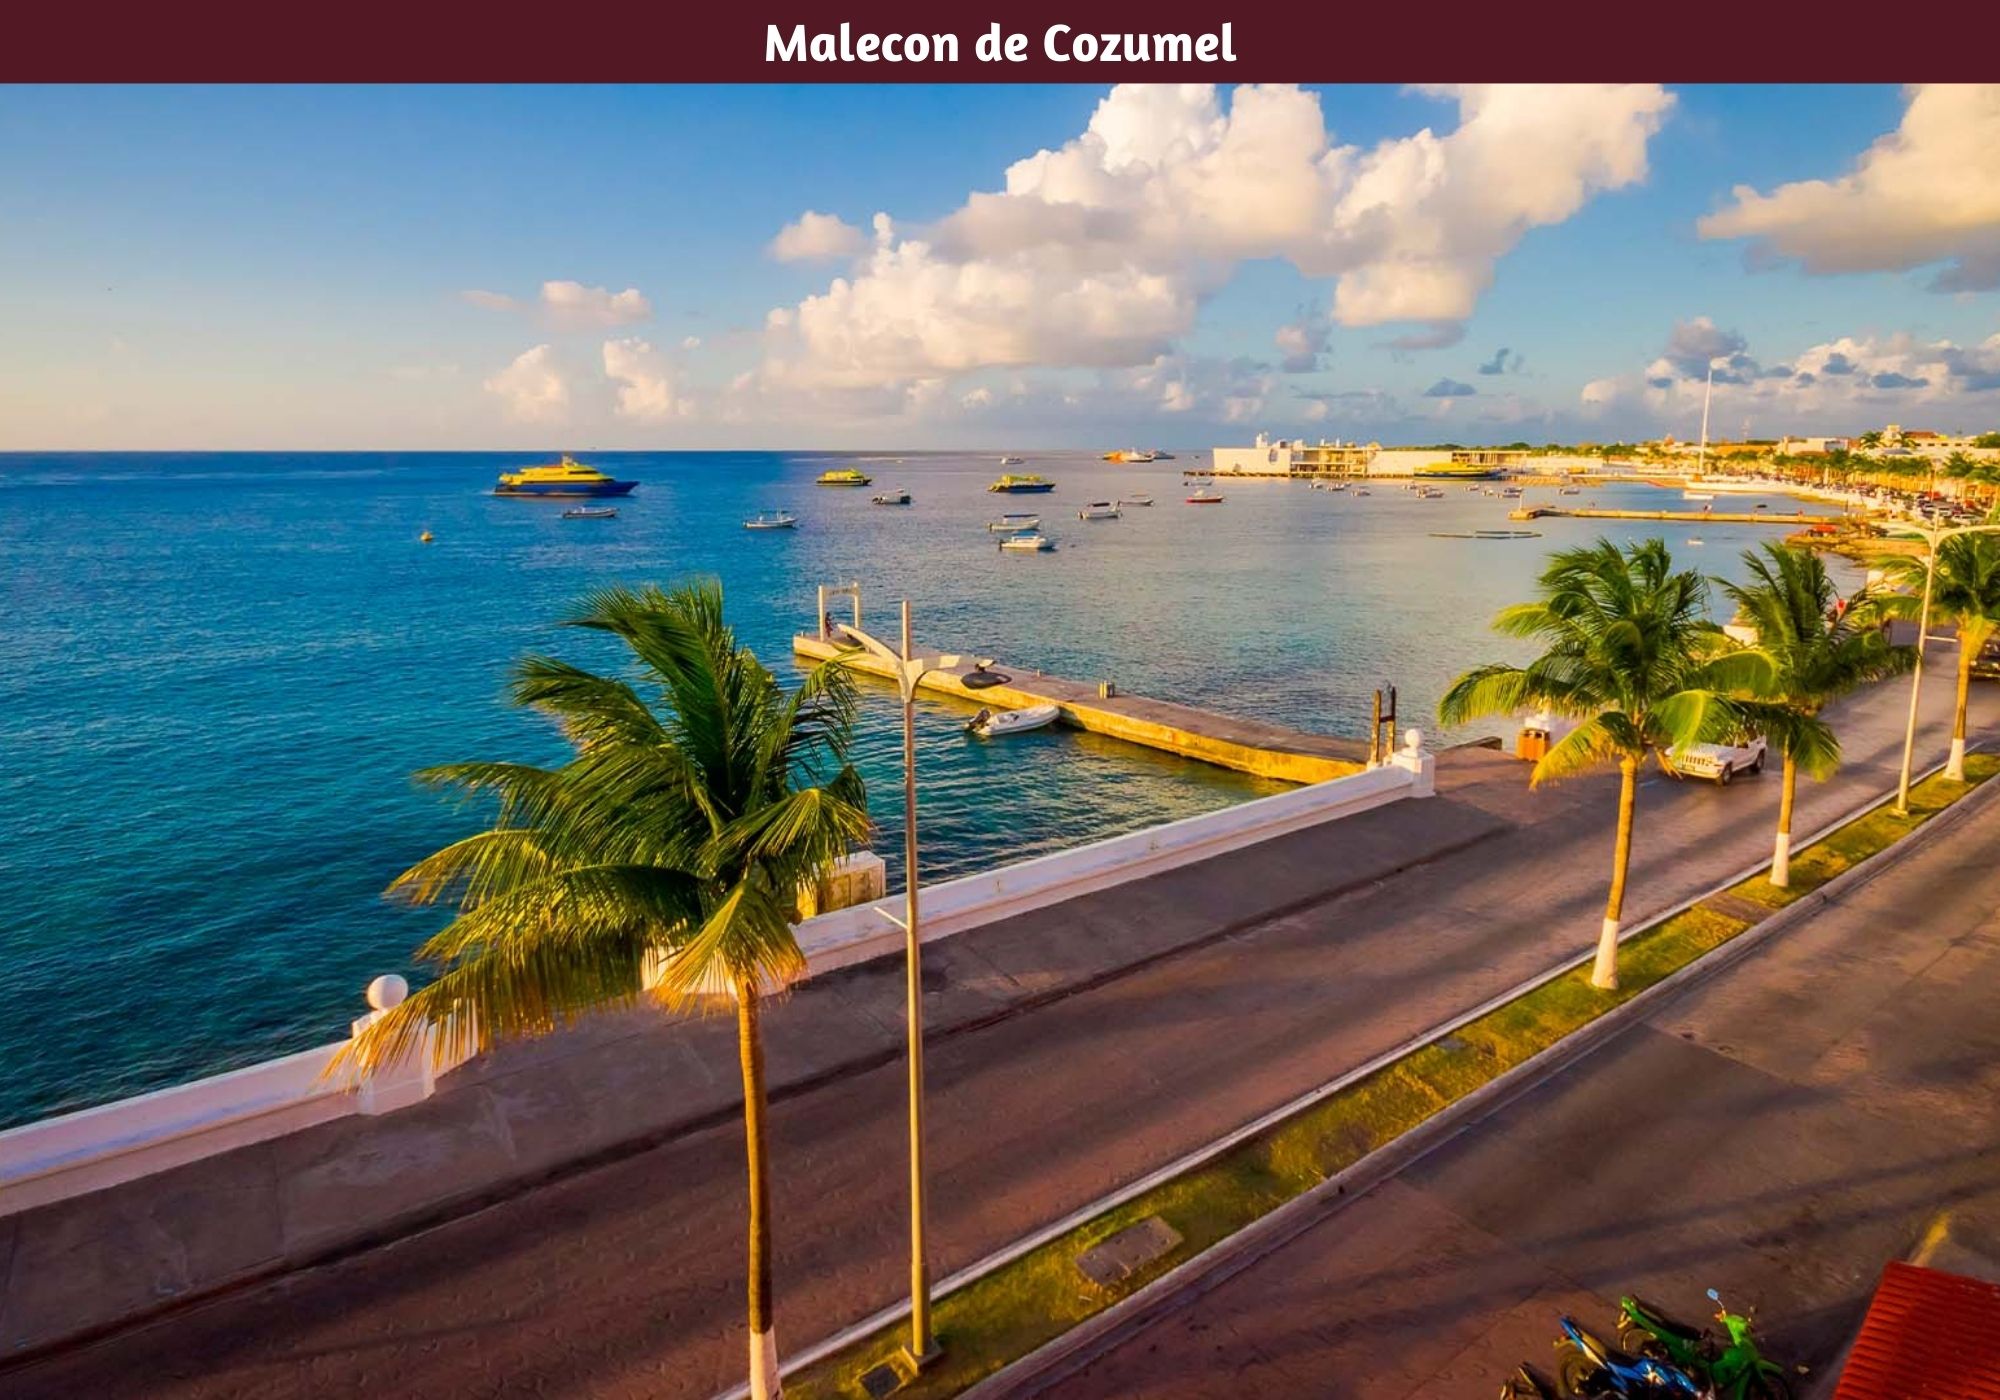 Lot for sale 5 minute drive to the beach, 10 de Abril, in Cozumel Island.